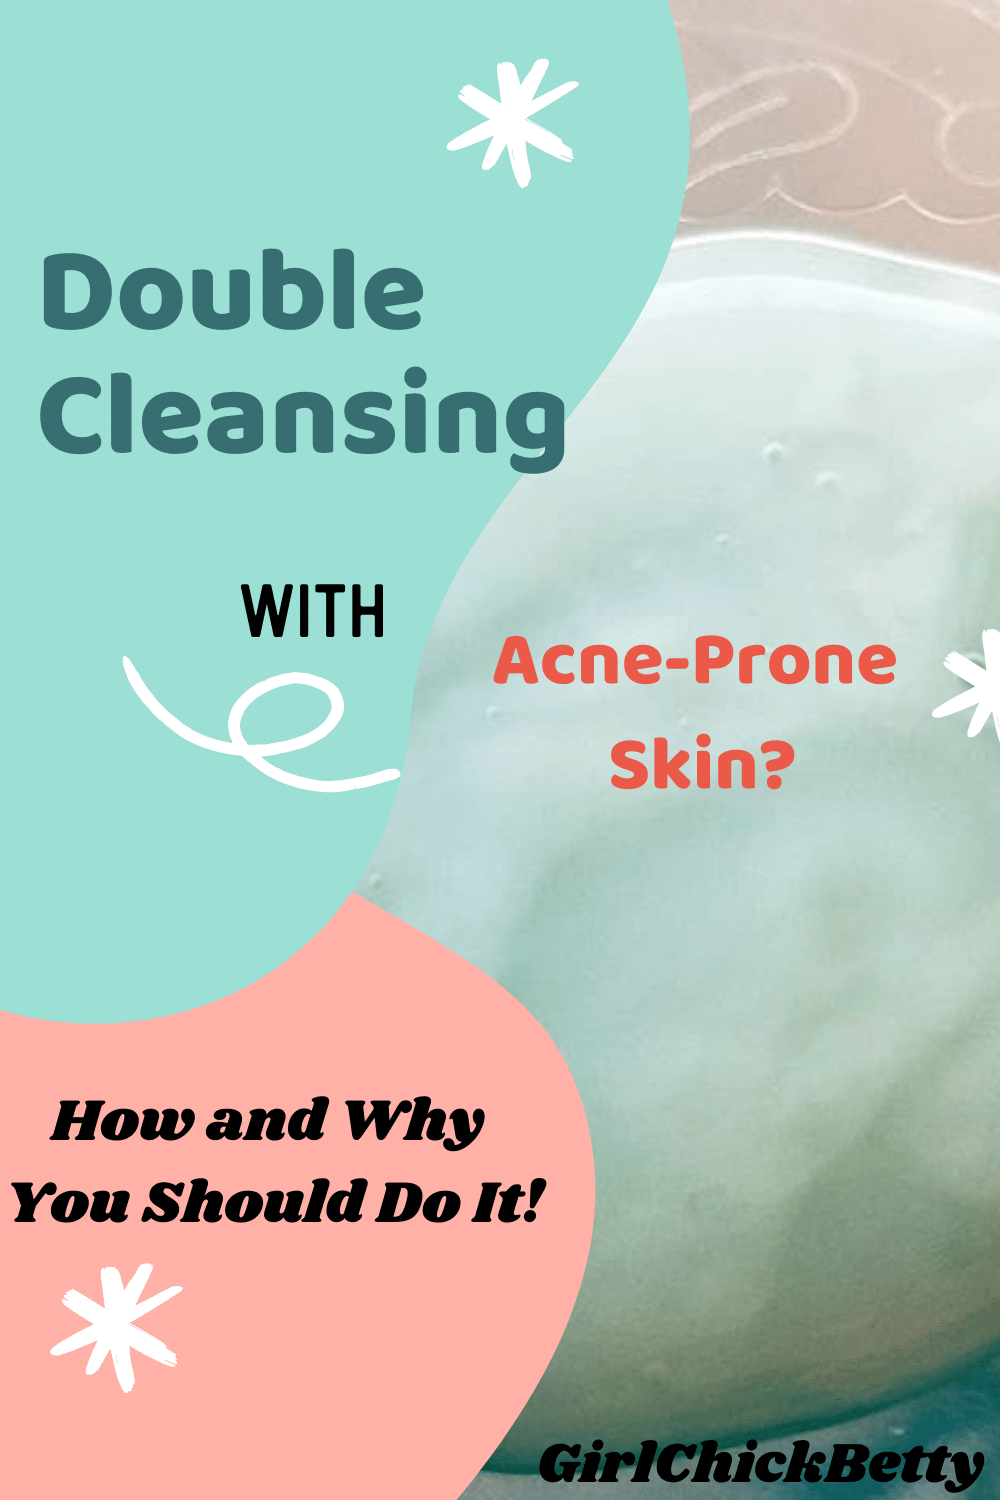 Double Cleansing Benefits for Acne-Prone Skin